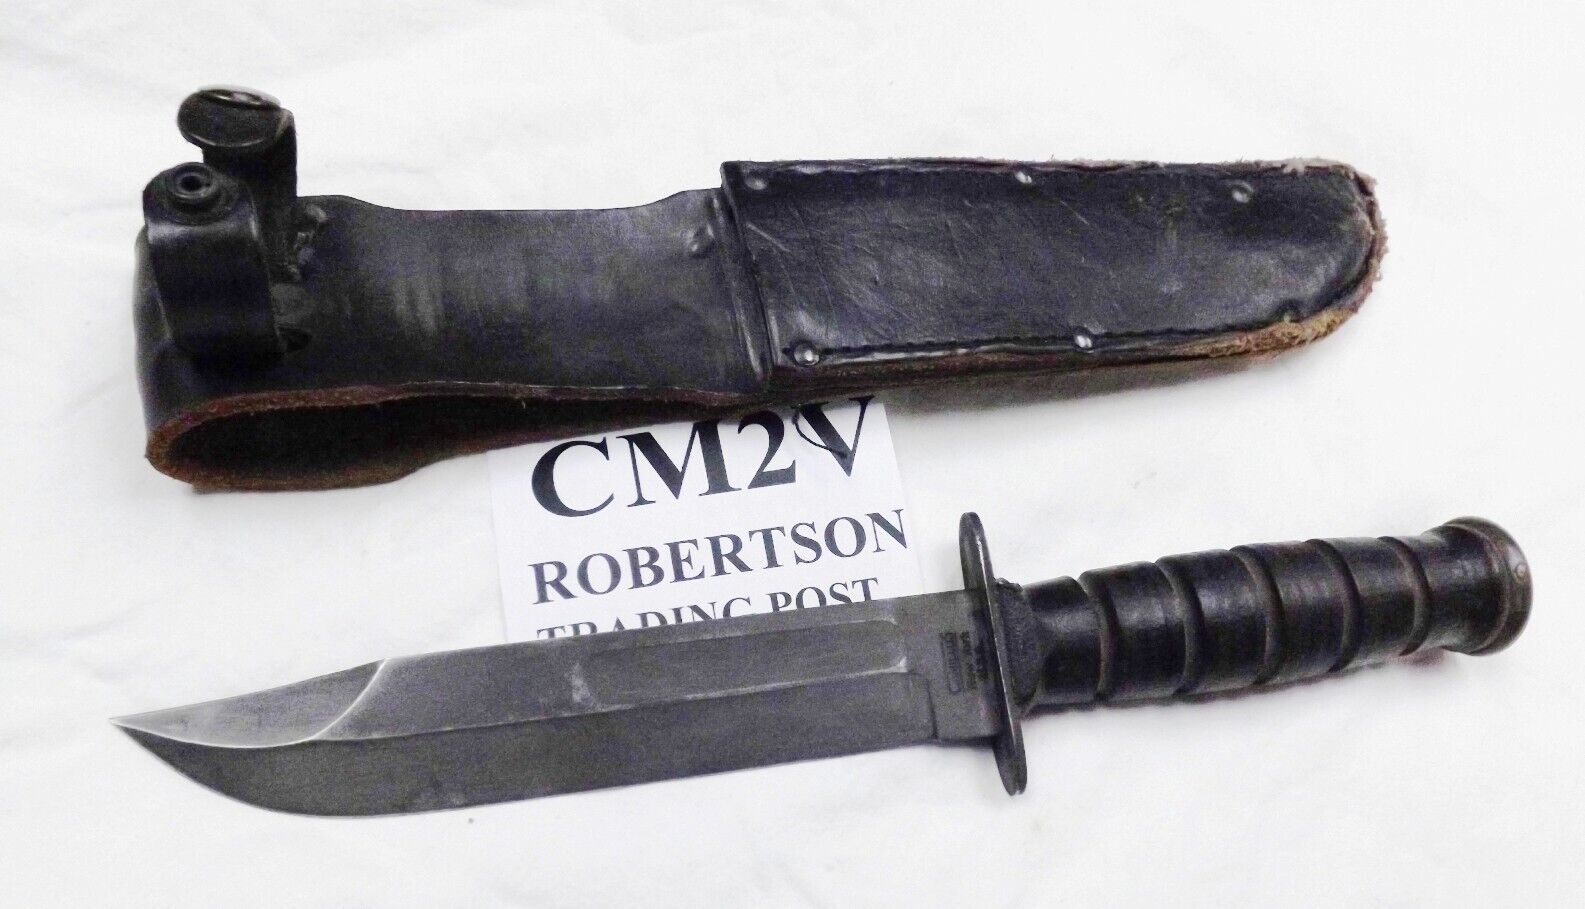 Camillus USA Navy type Fighting Knife 12 inch with Scabbard 1989 Military VG-Exc